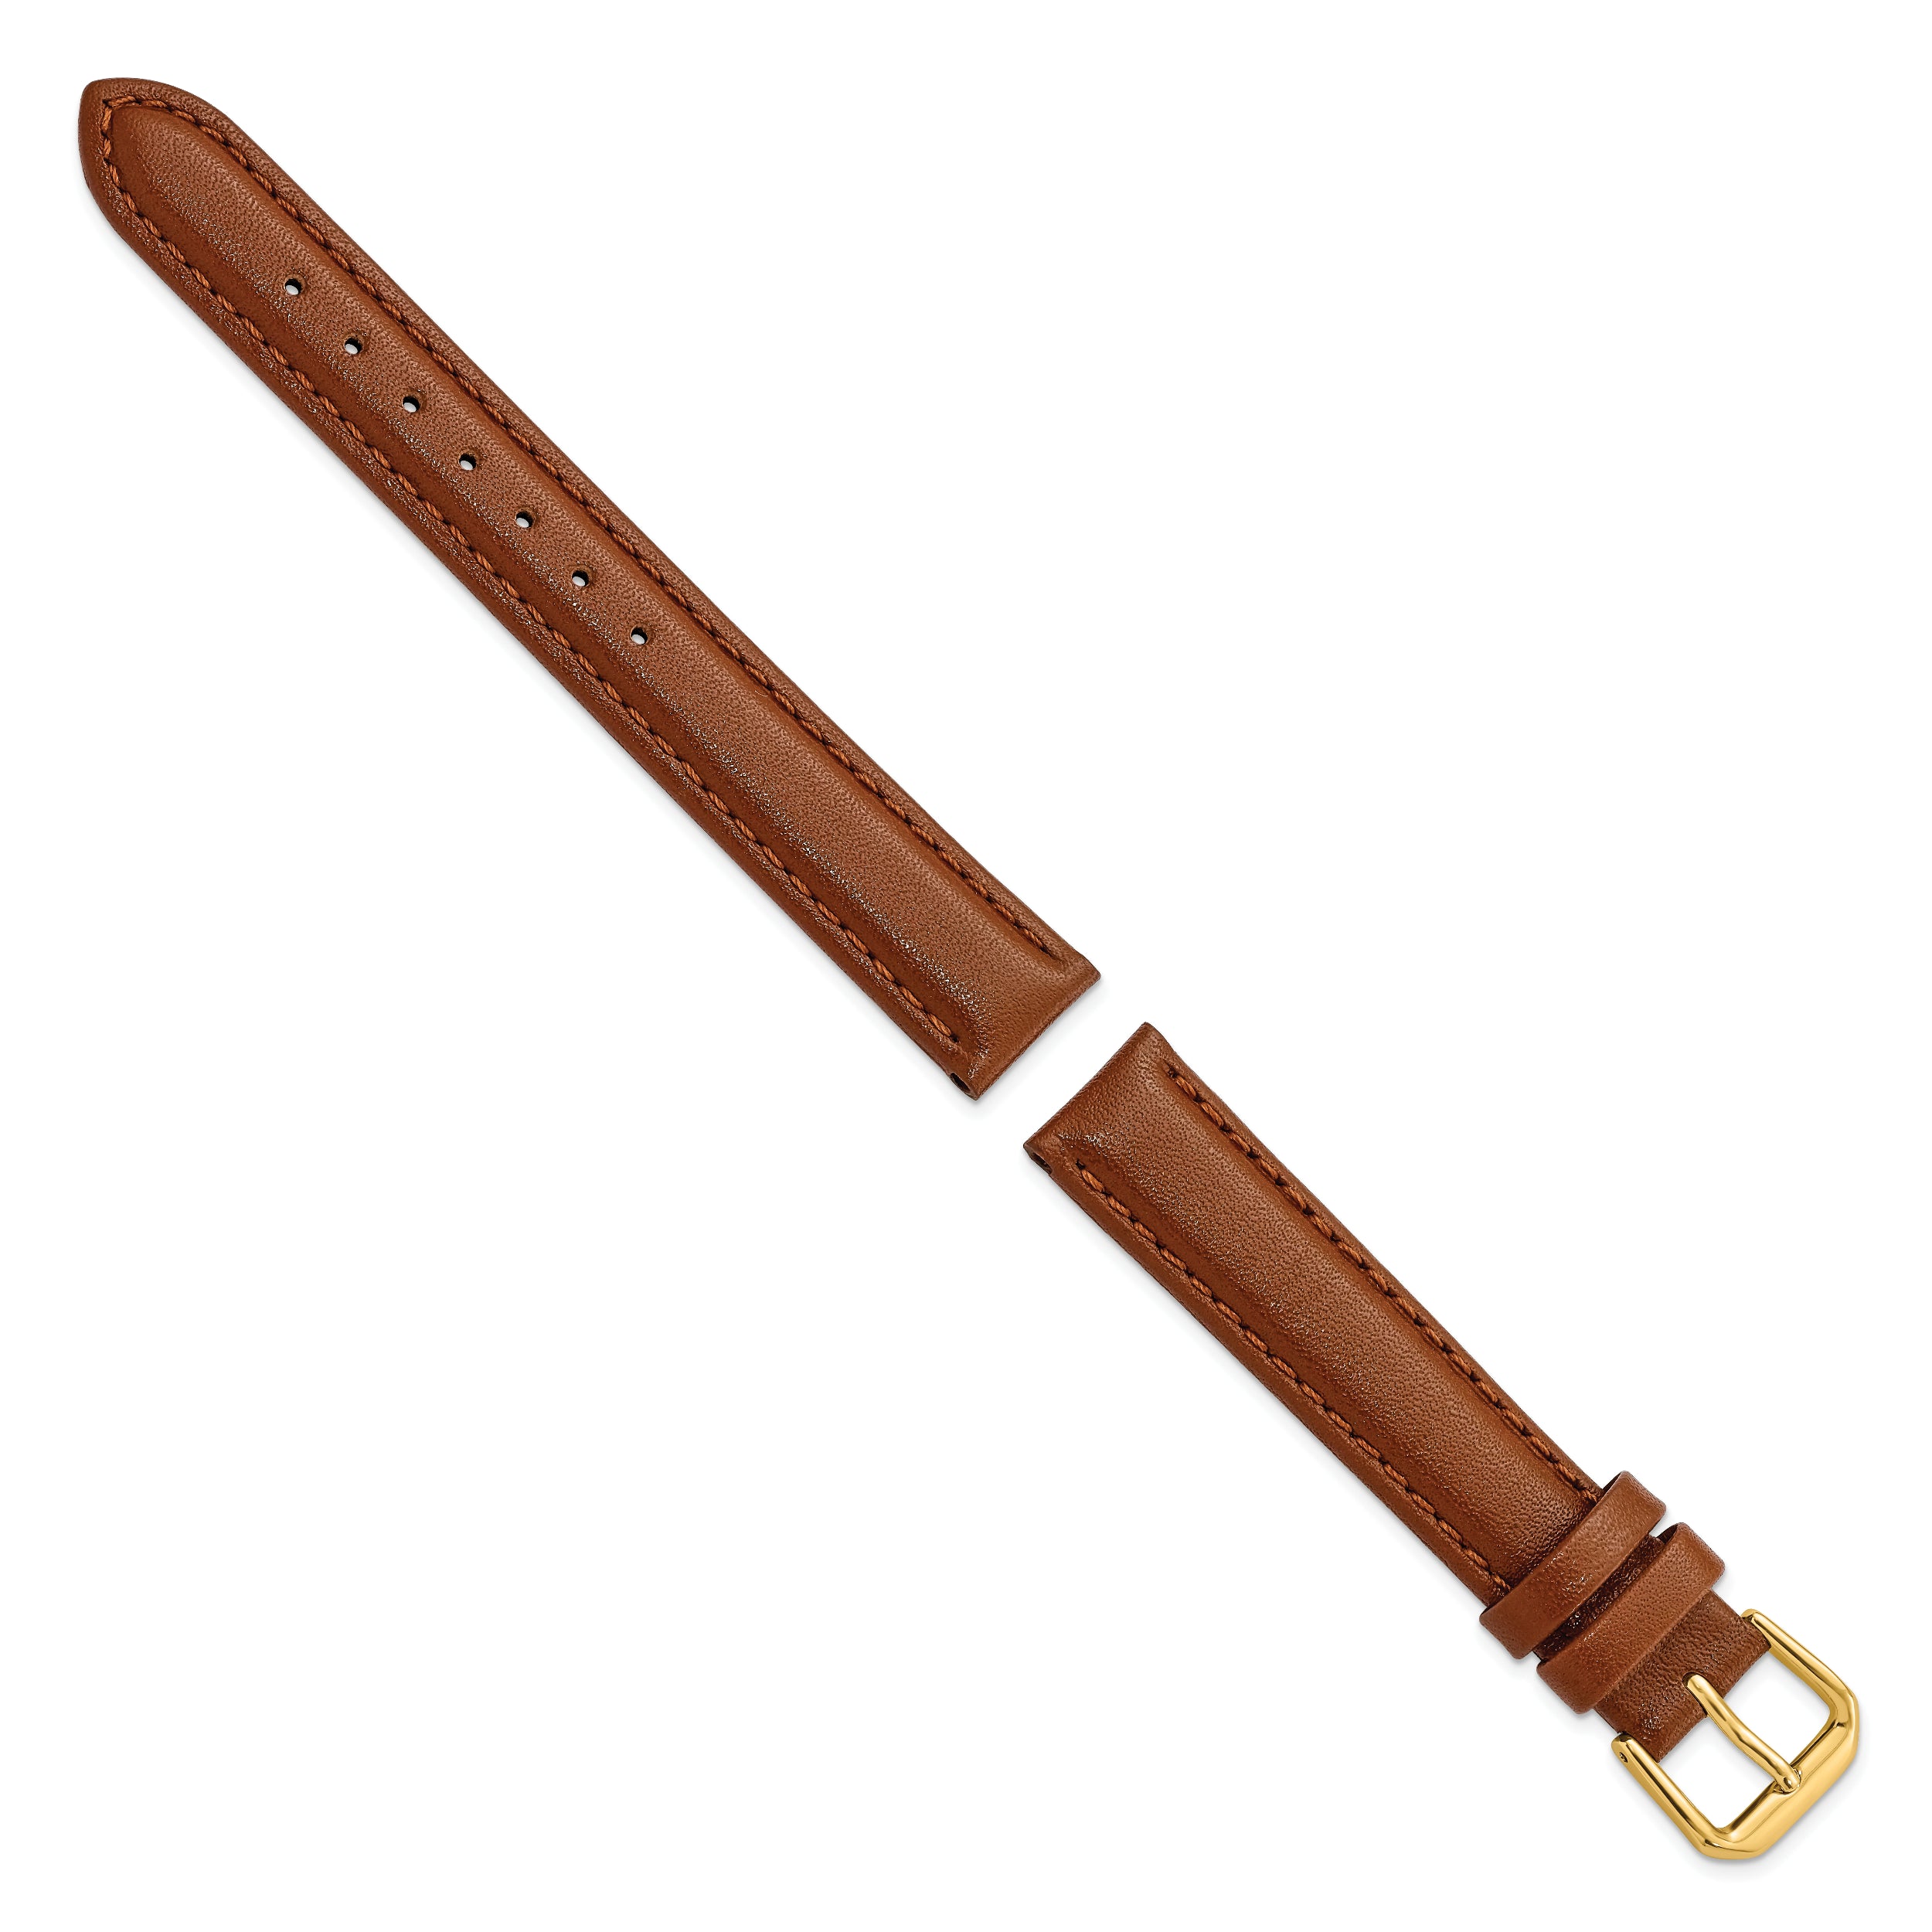 10mm Havana Smooth Leather with Gold-tone Buckle 6.75 inch Watch Band